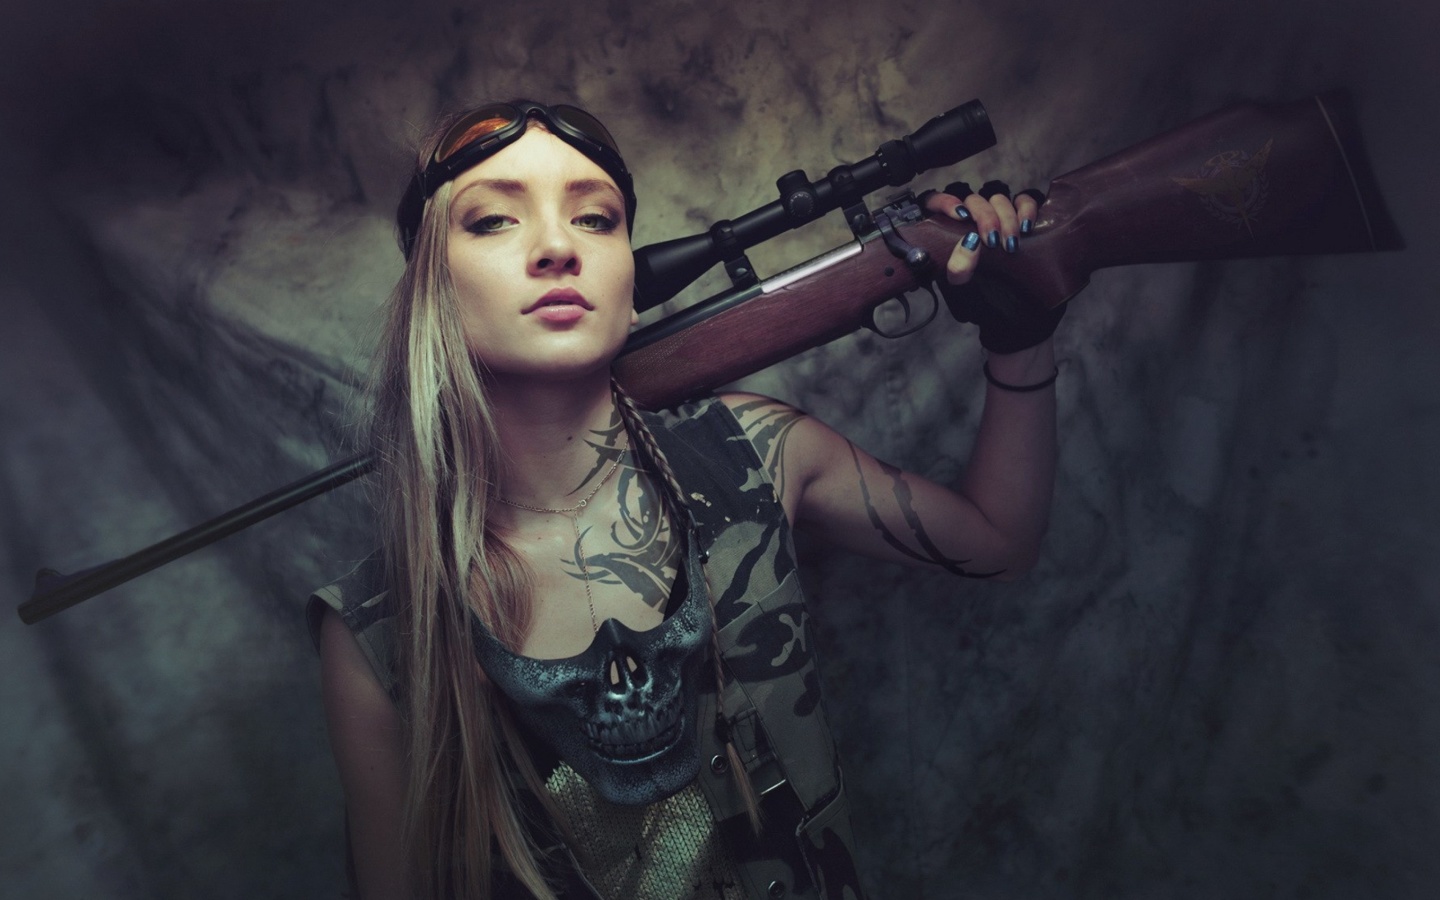 Soldier girl with a sniper rifle screenshot #1 1440x900